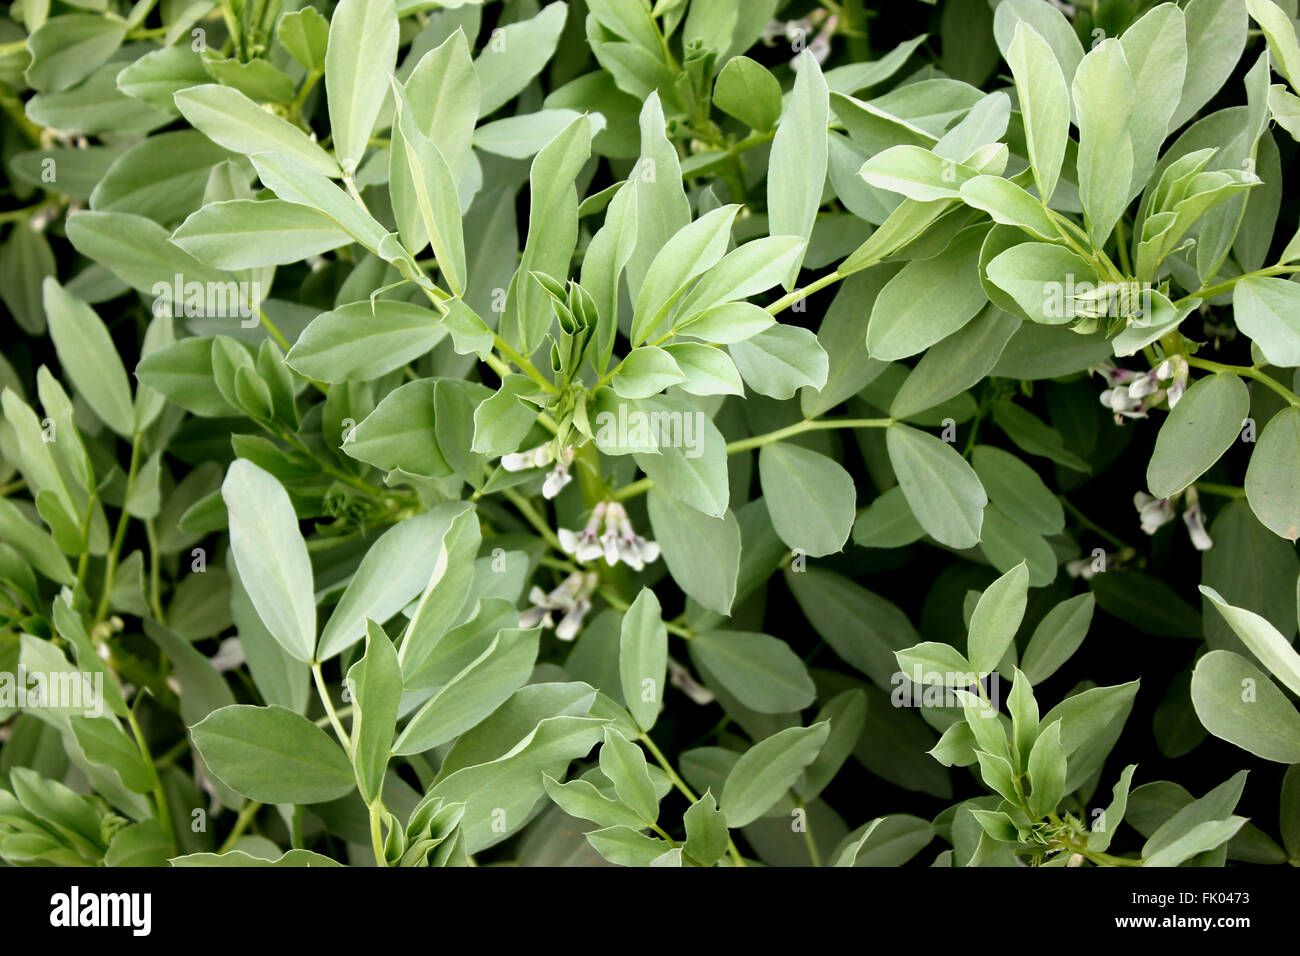 Vicia faba, Broad bean, faba bean, fava bean, cultivated herb witth pinnate leaves, creamish-white flowers, pods with seeds Stock Photo